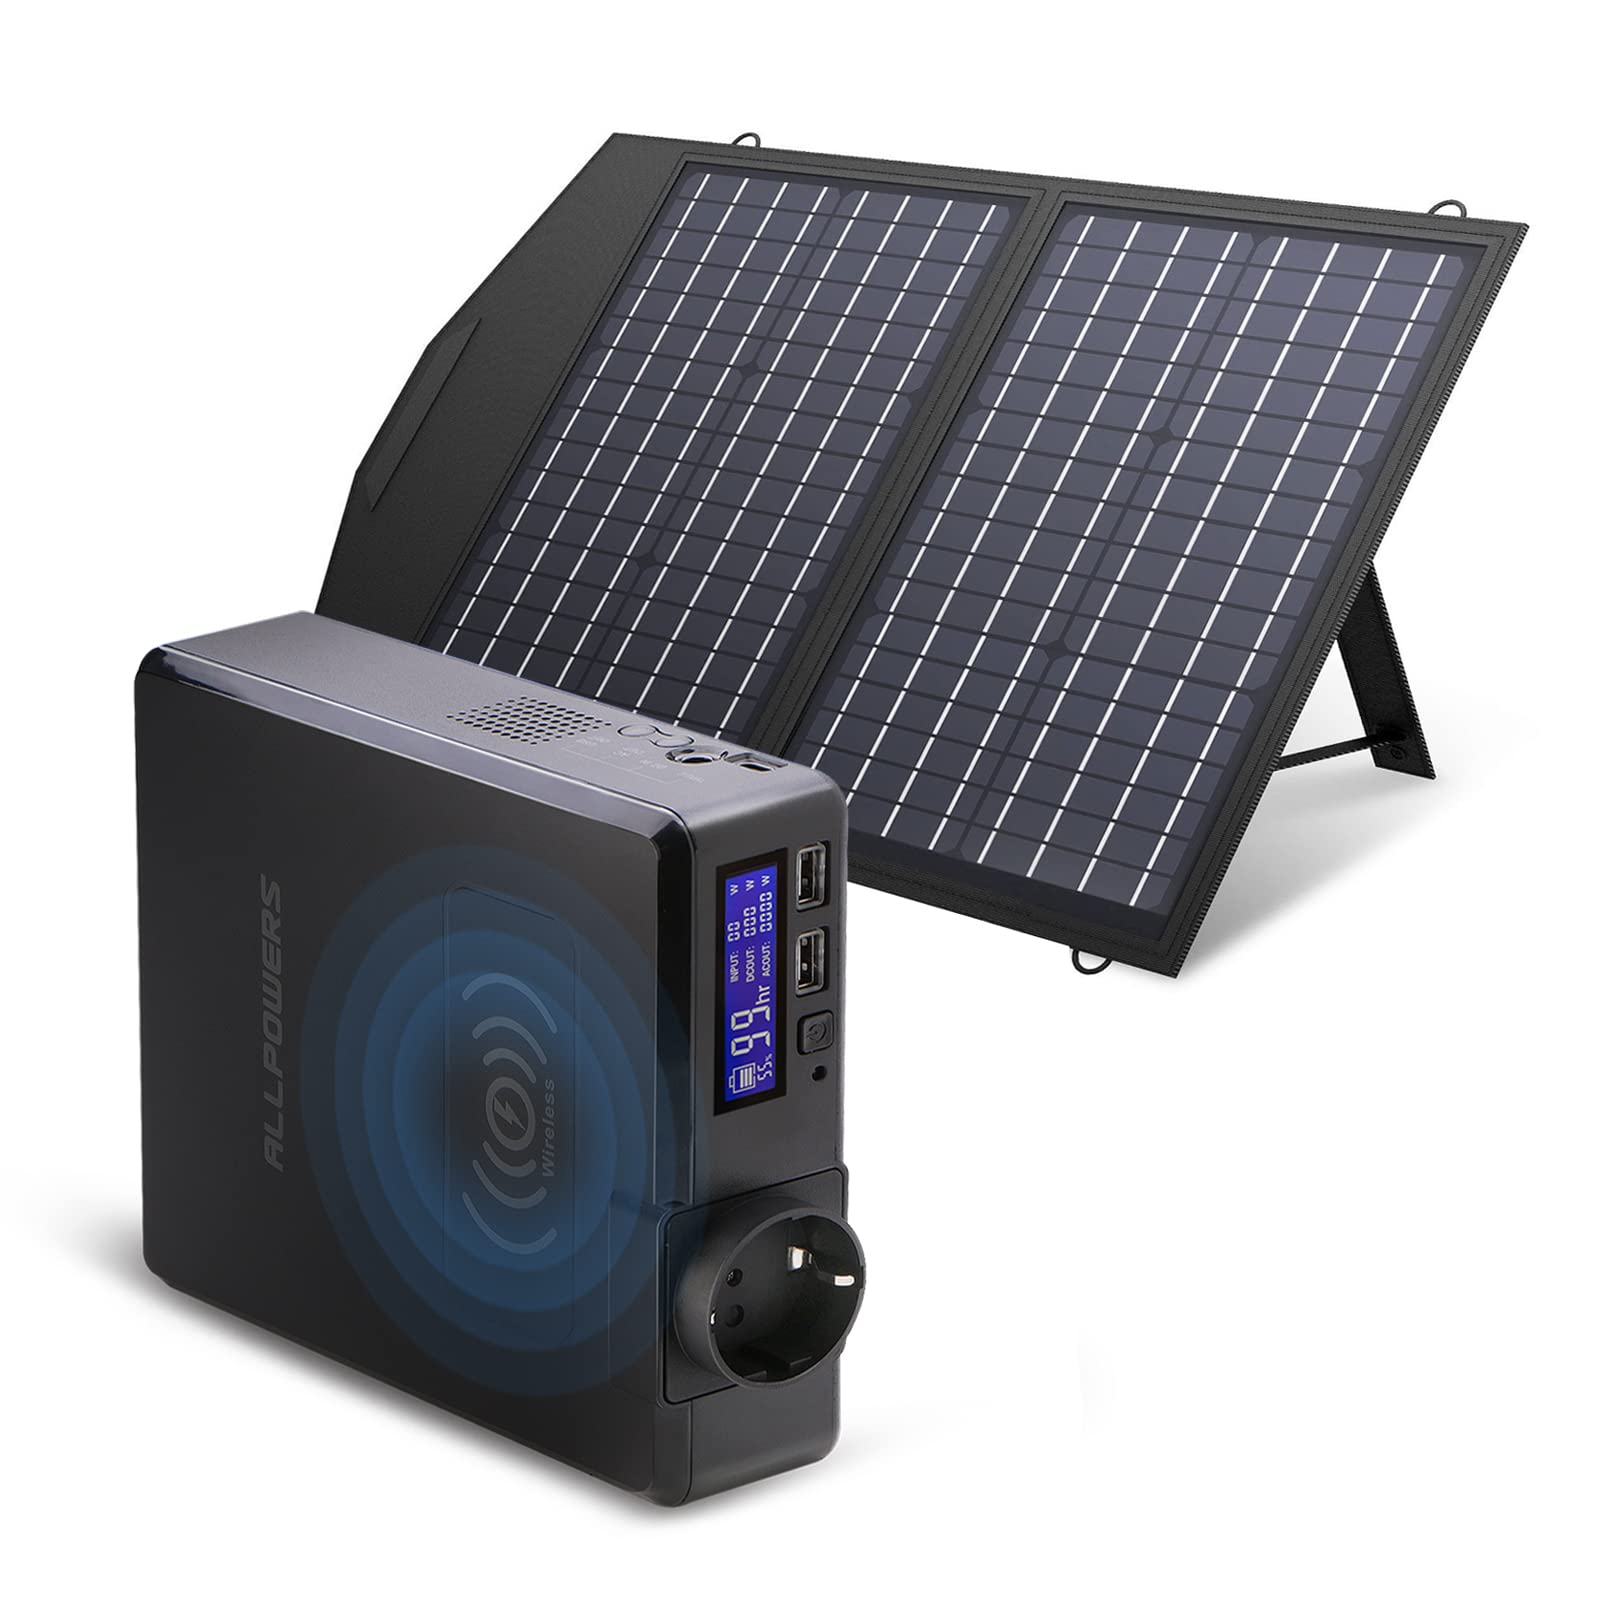 ALLPOWERS S200 Solar Generator Portable Power Bank 200W 154Wh with SP020 60W Solar Panel